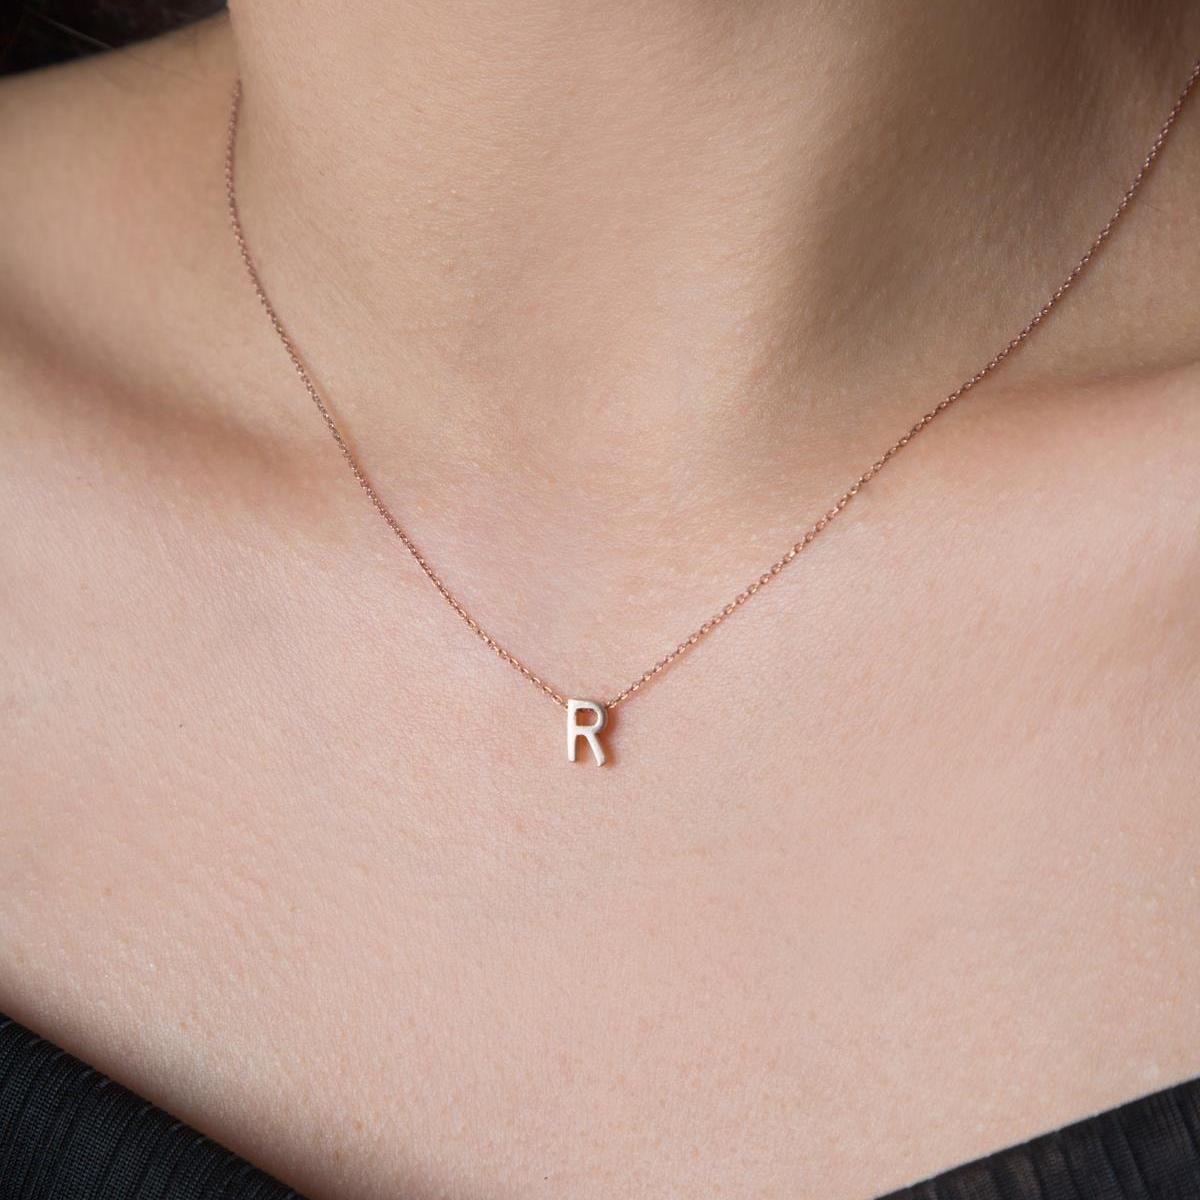 R Initial Necklace Rose • Rose Gold Initial Necklace • Gift For Her - Trending Silver Gifts